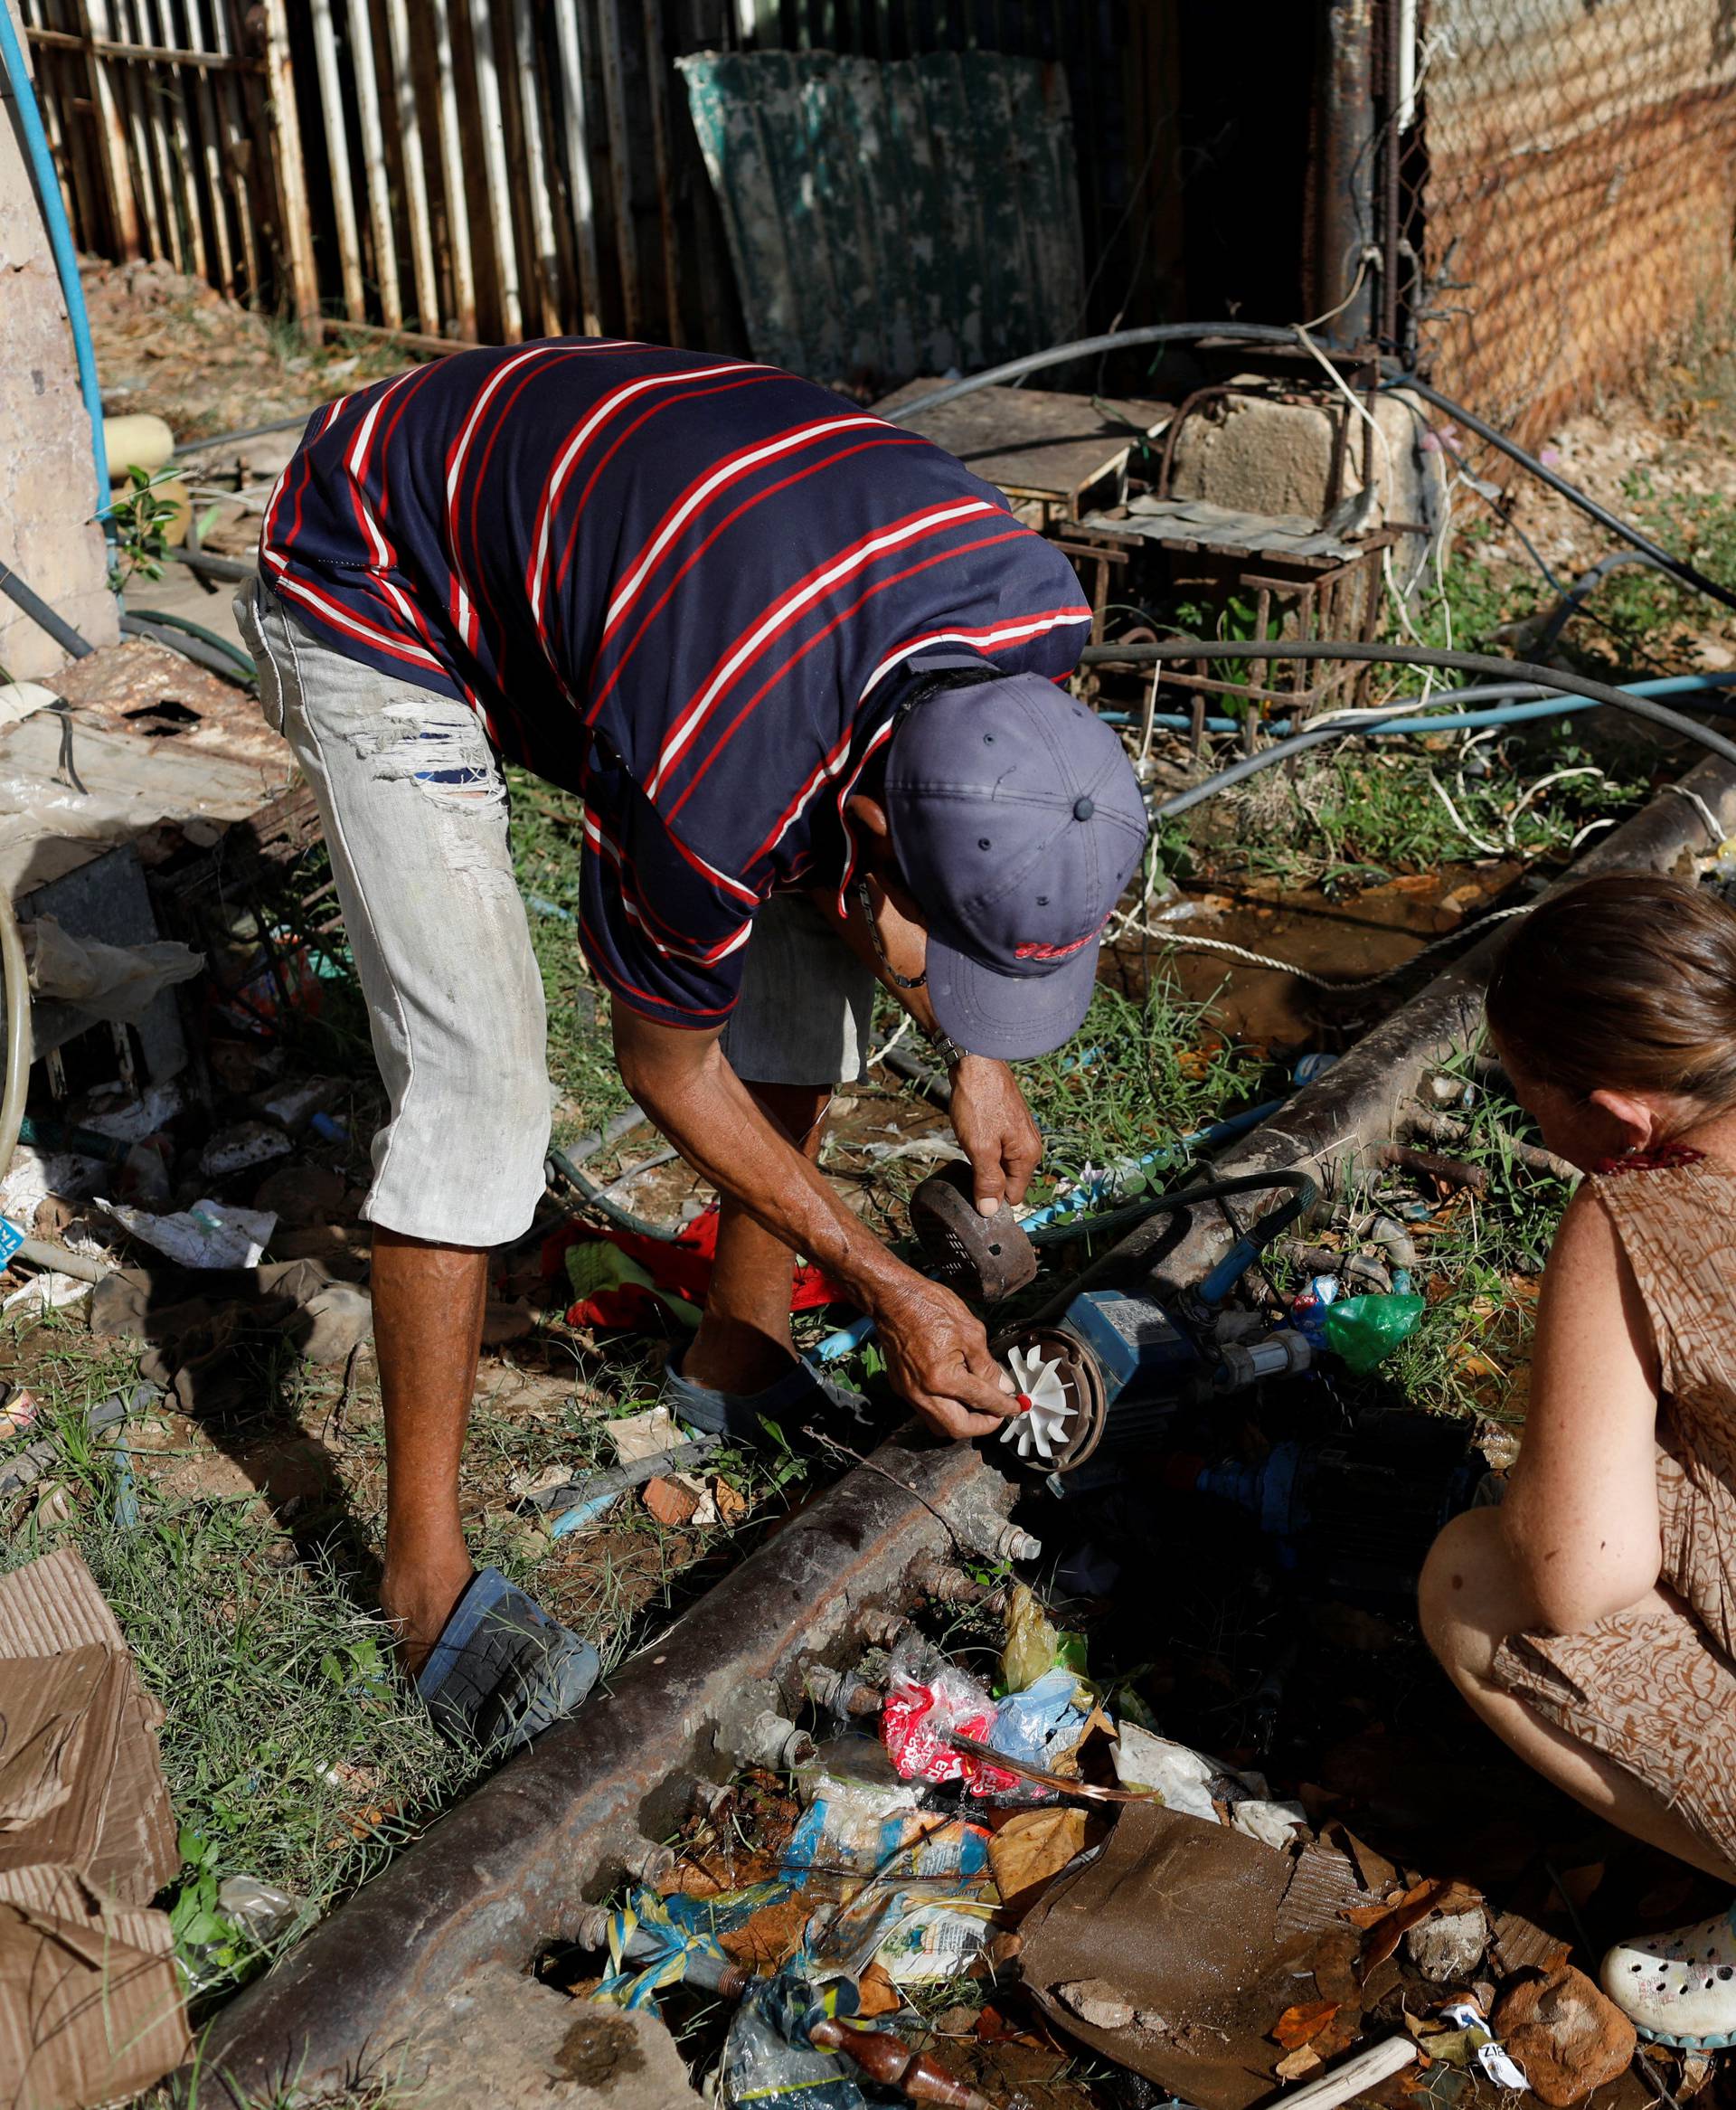 People set up a pump and fill buckets with water from a pipe in a street of Maracaibo